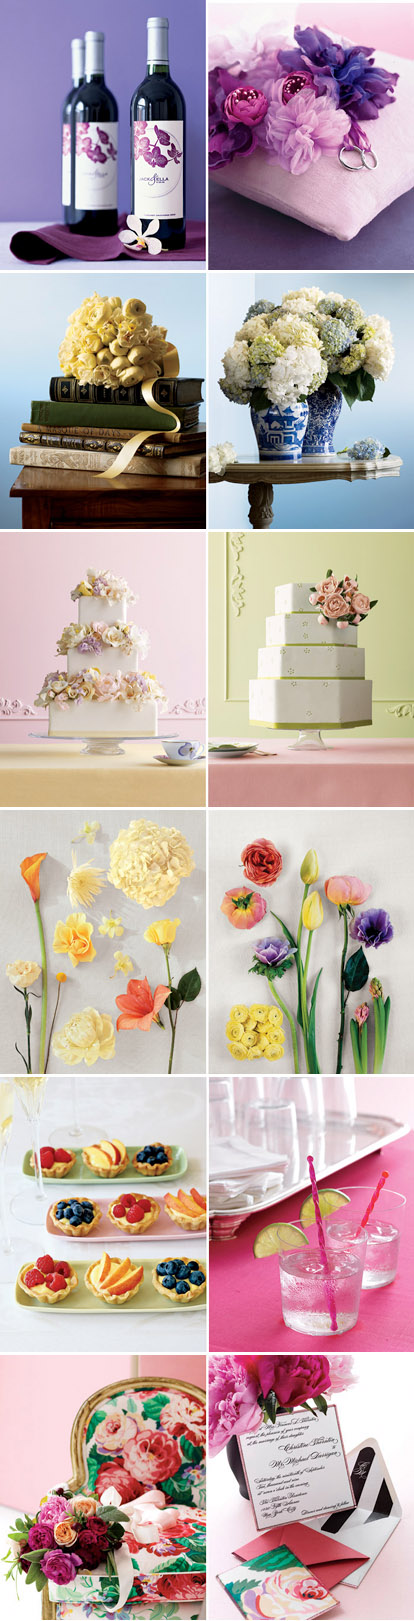 wedding inspiration, bridal bouquets and flowers, wedding cakes and color palettes, styled by Erin Swift, images via ErinSwift.com